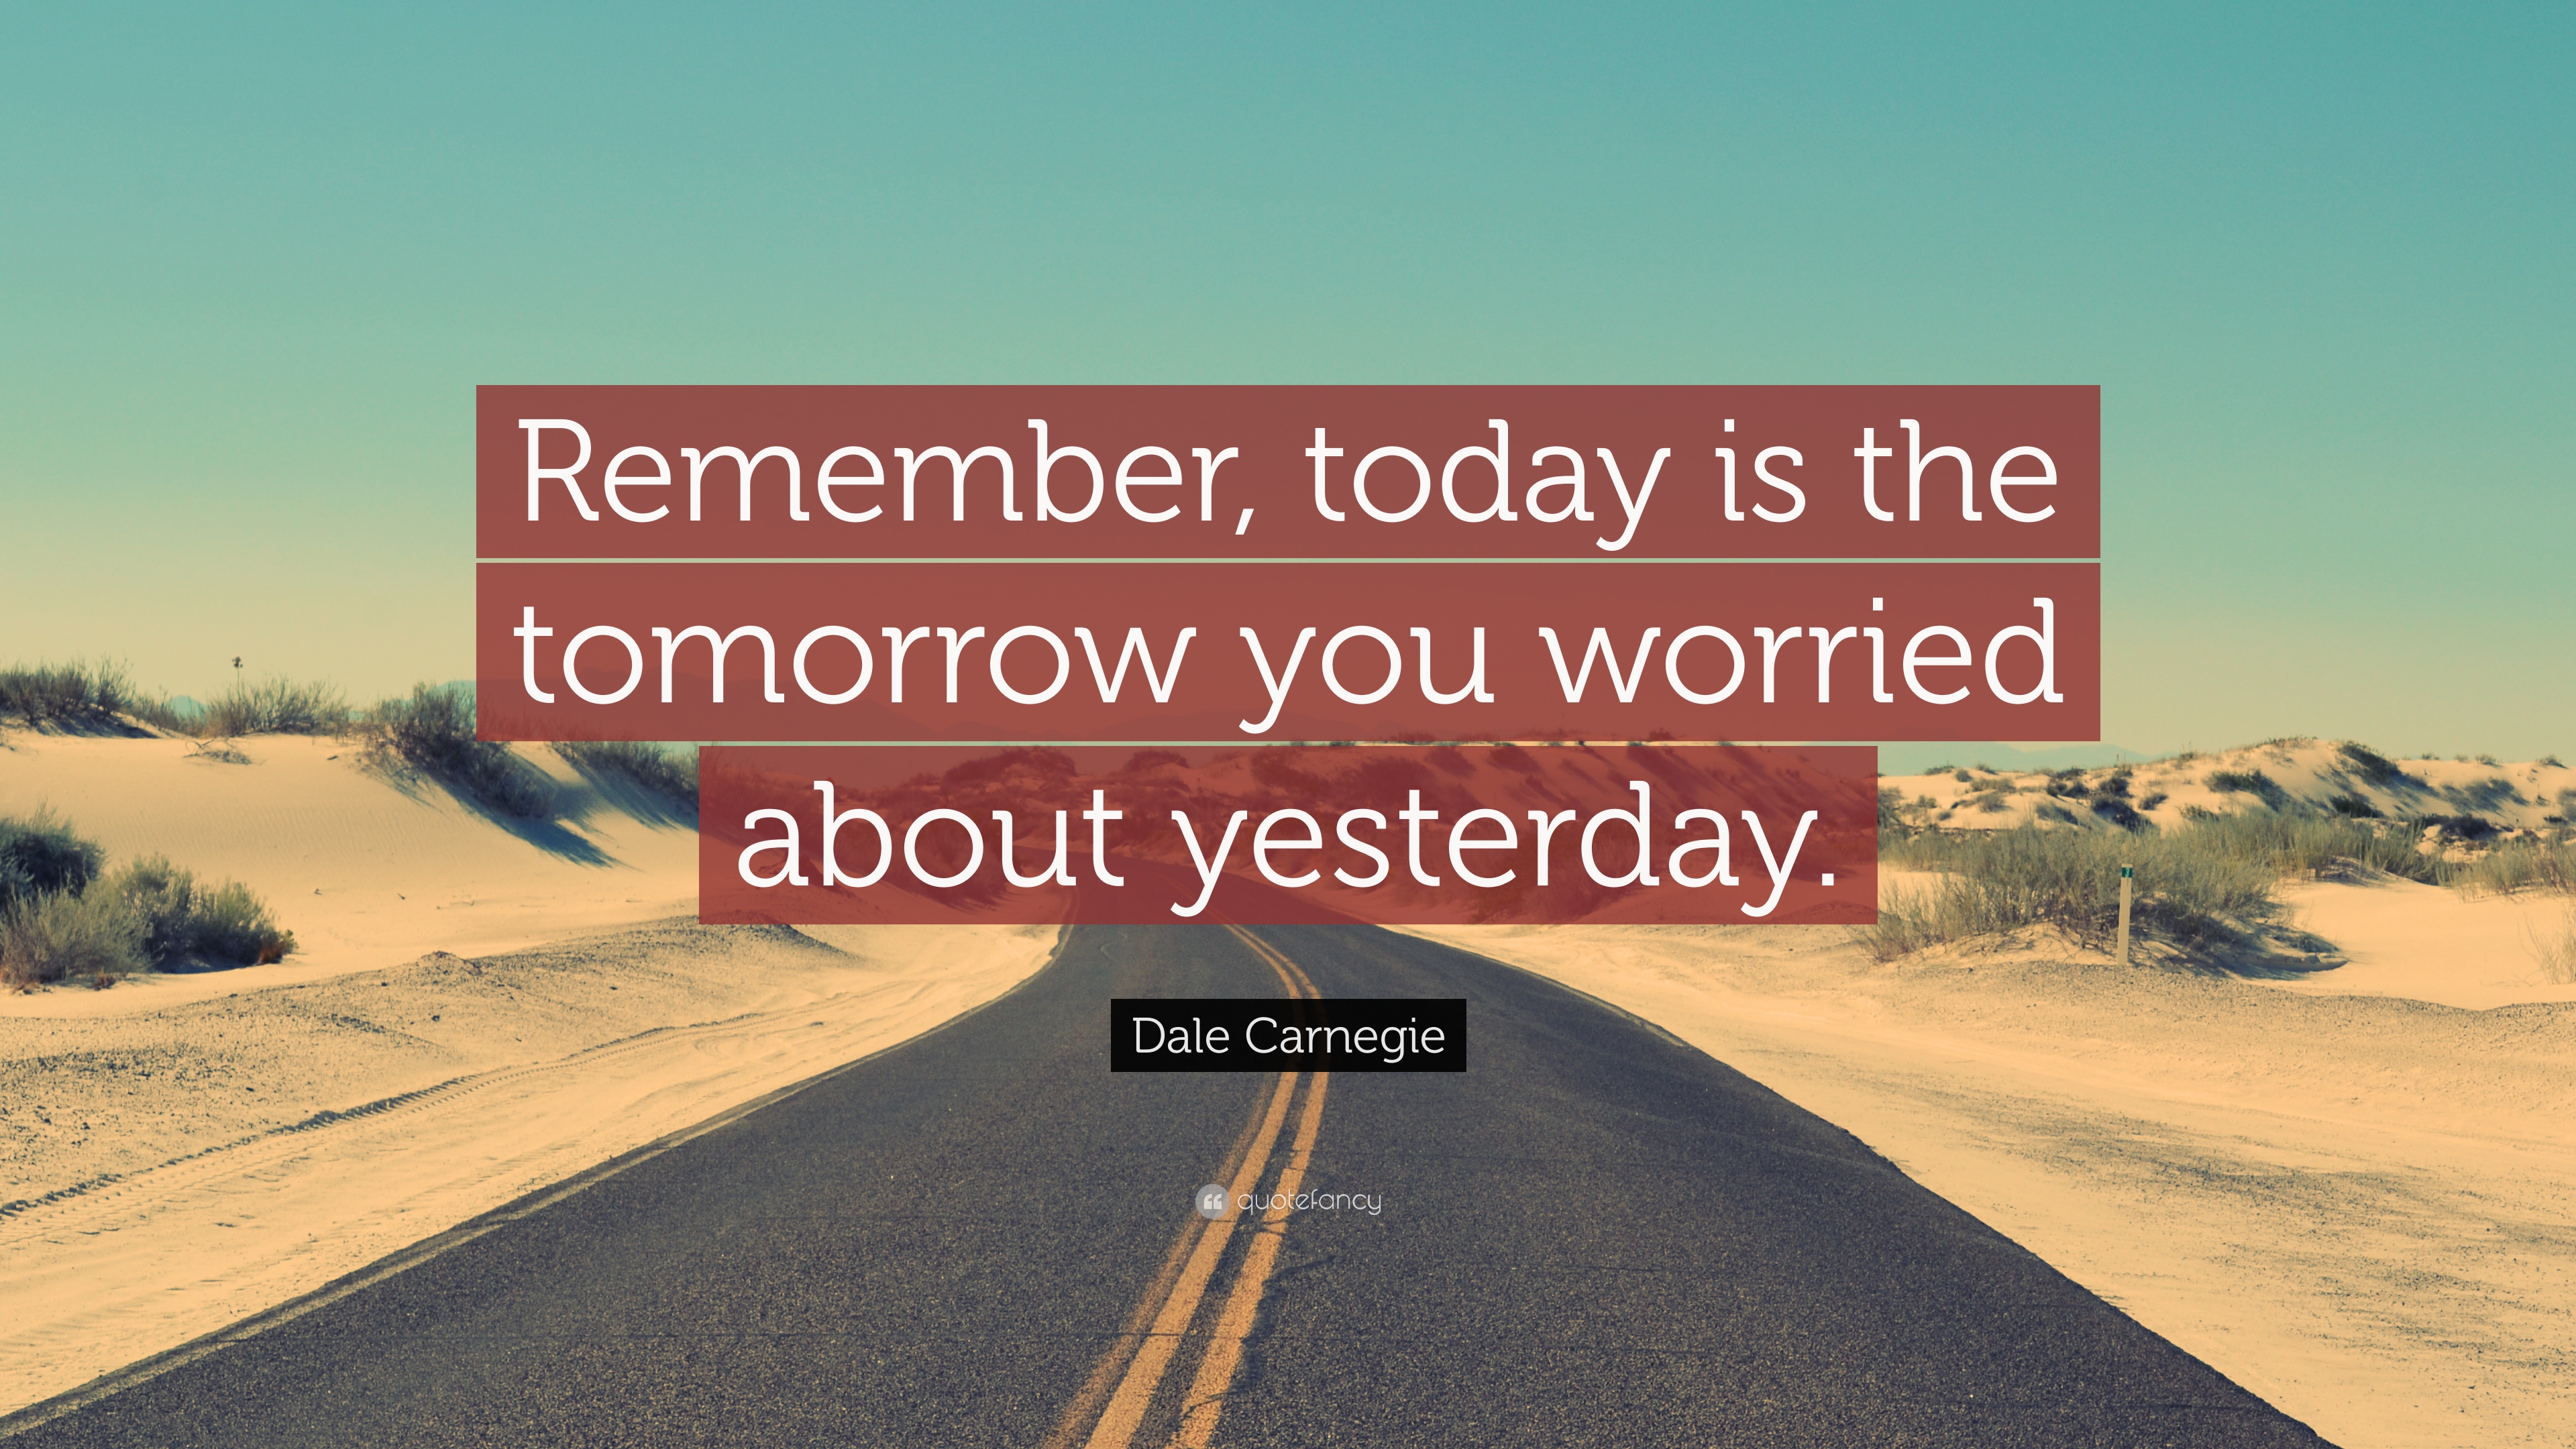 17312-Dale-Carnegie-Quote-Remember-today-is-the-tomorrow-you-worried.jpg